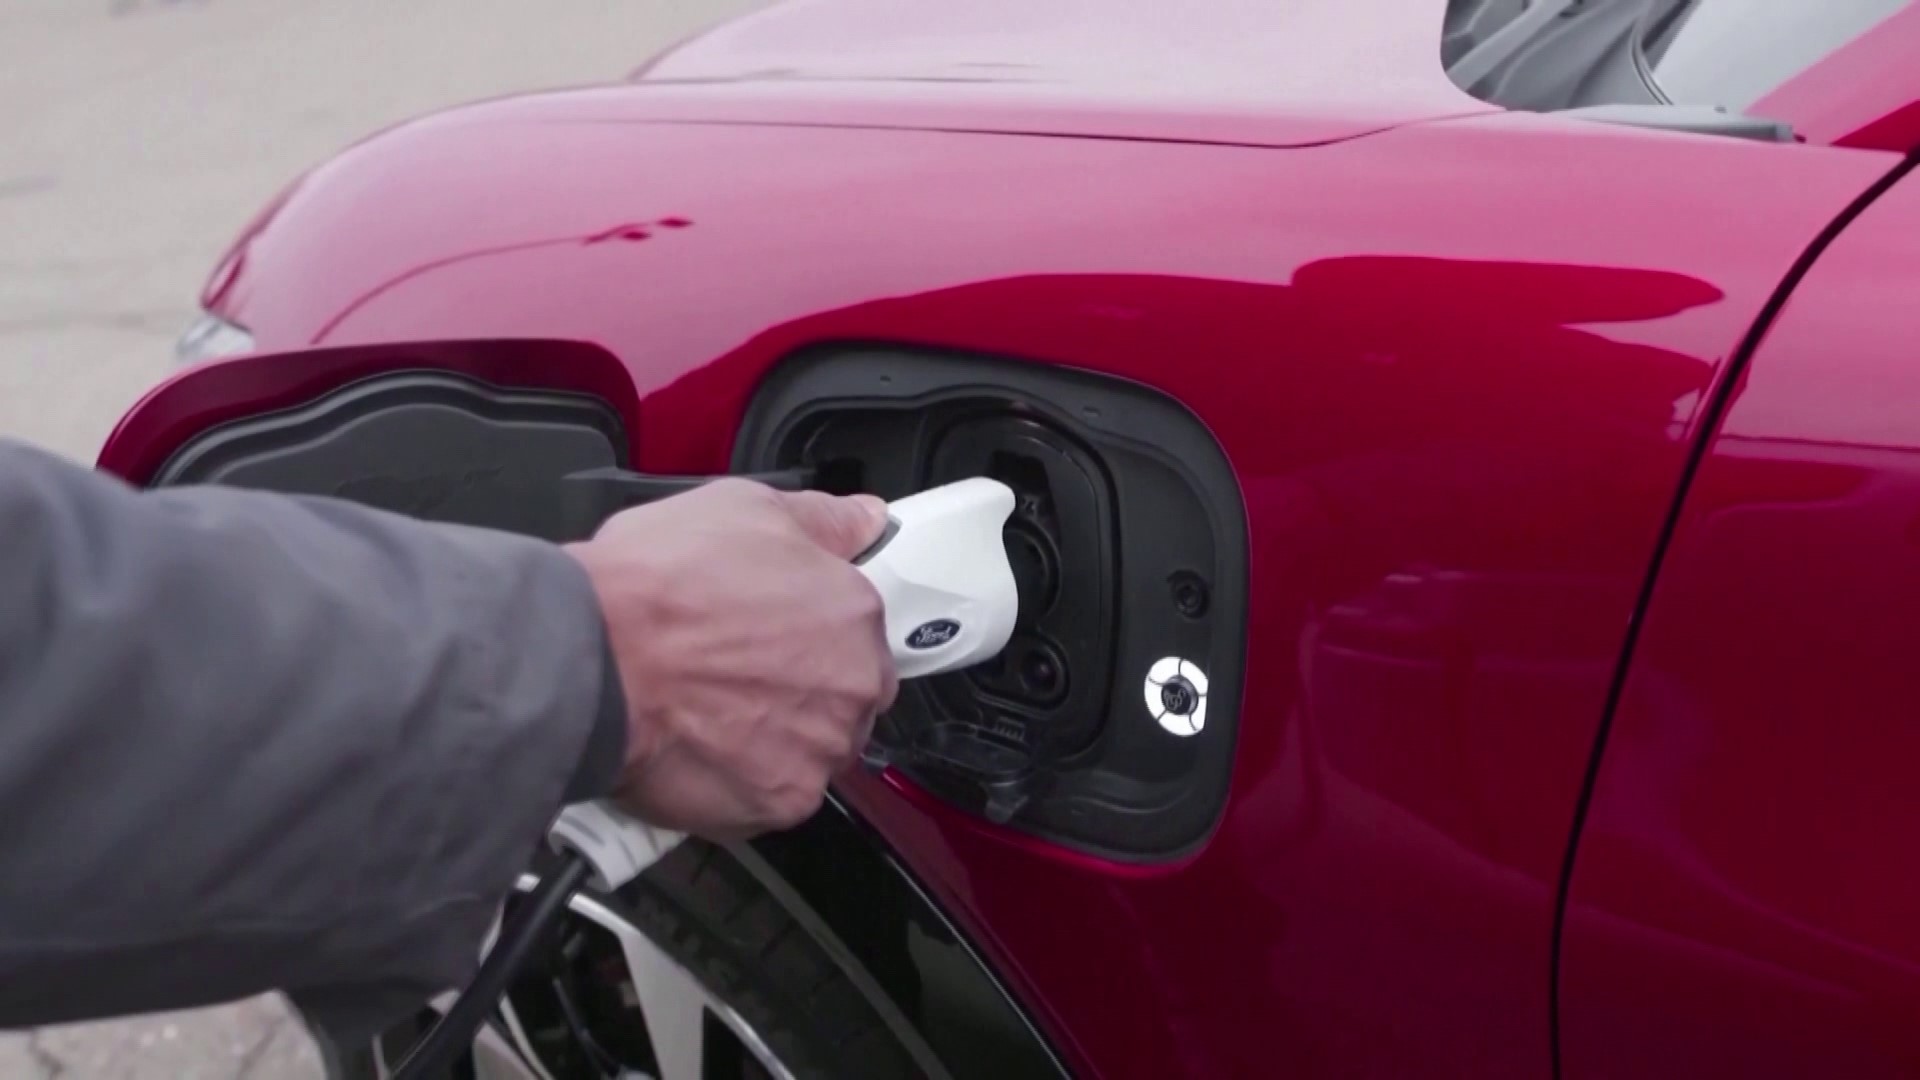 With over 12,000 Tesla charging stations around the country and Canada, Ford electric vehicles will be manufactured with Tesla standard charging connectors.